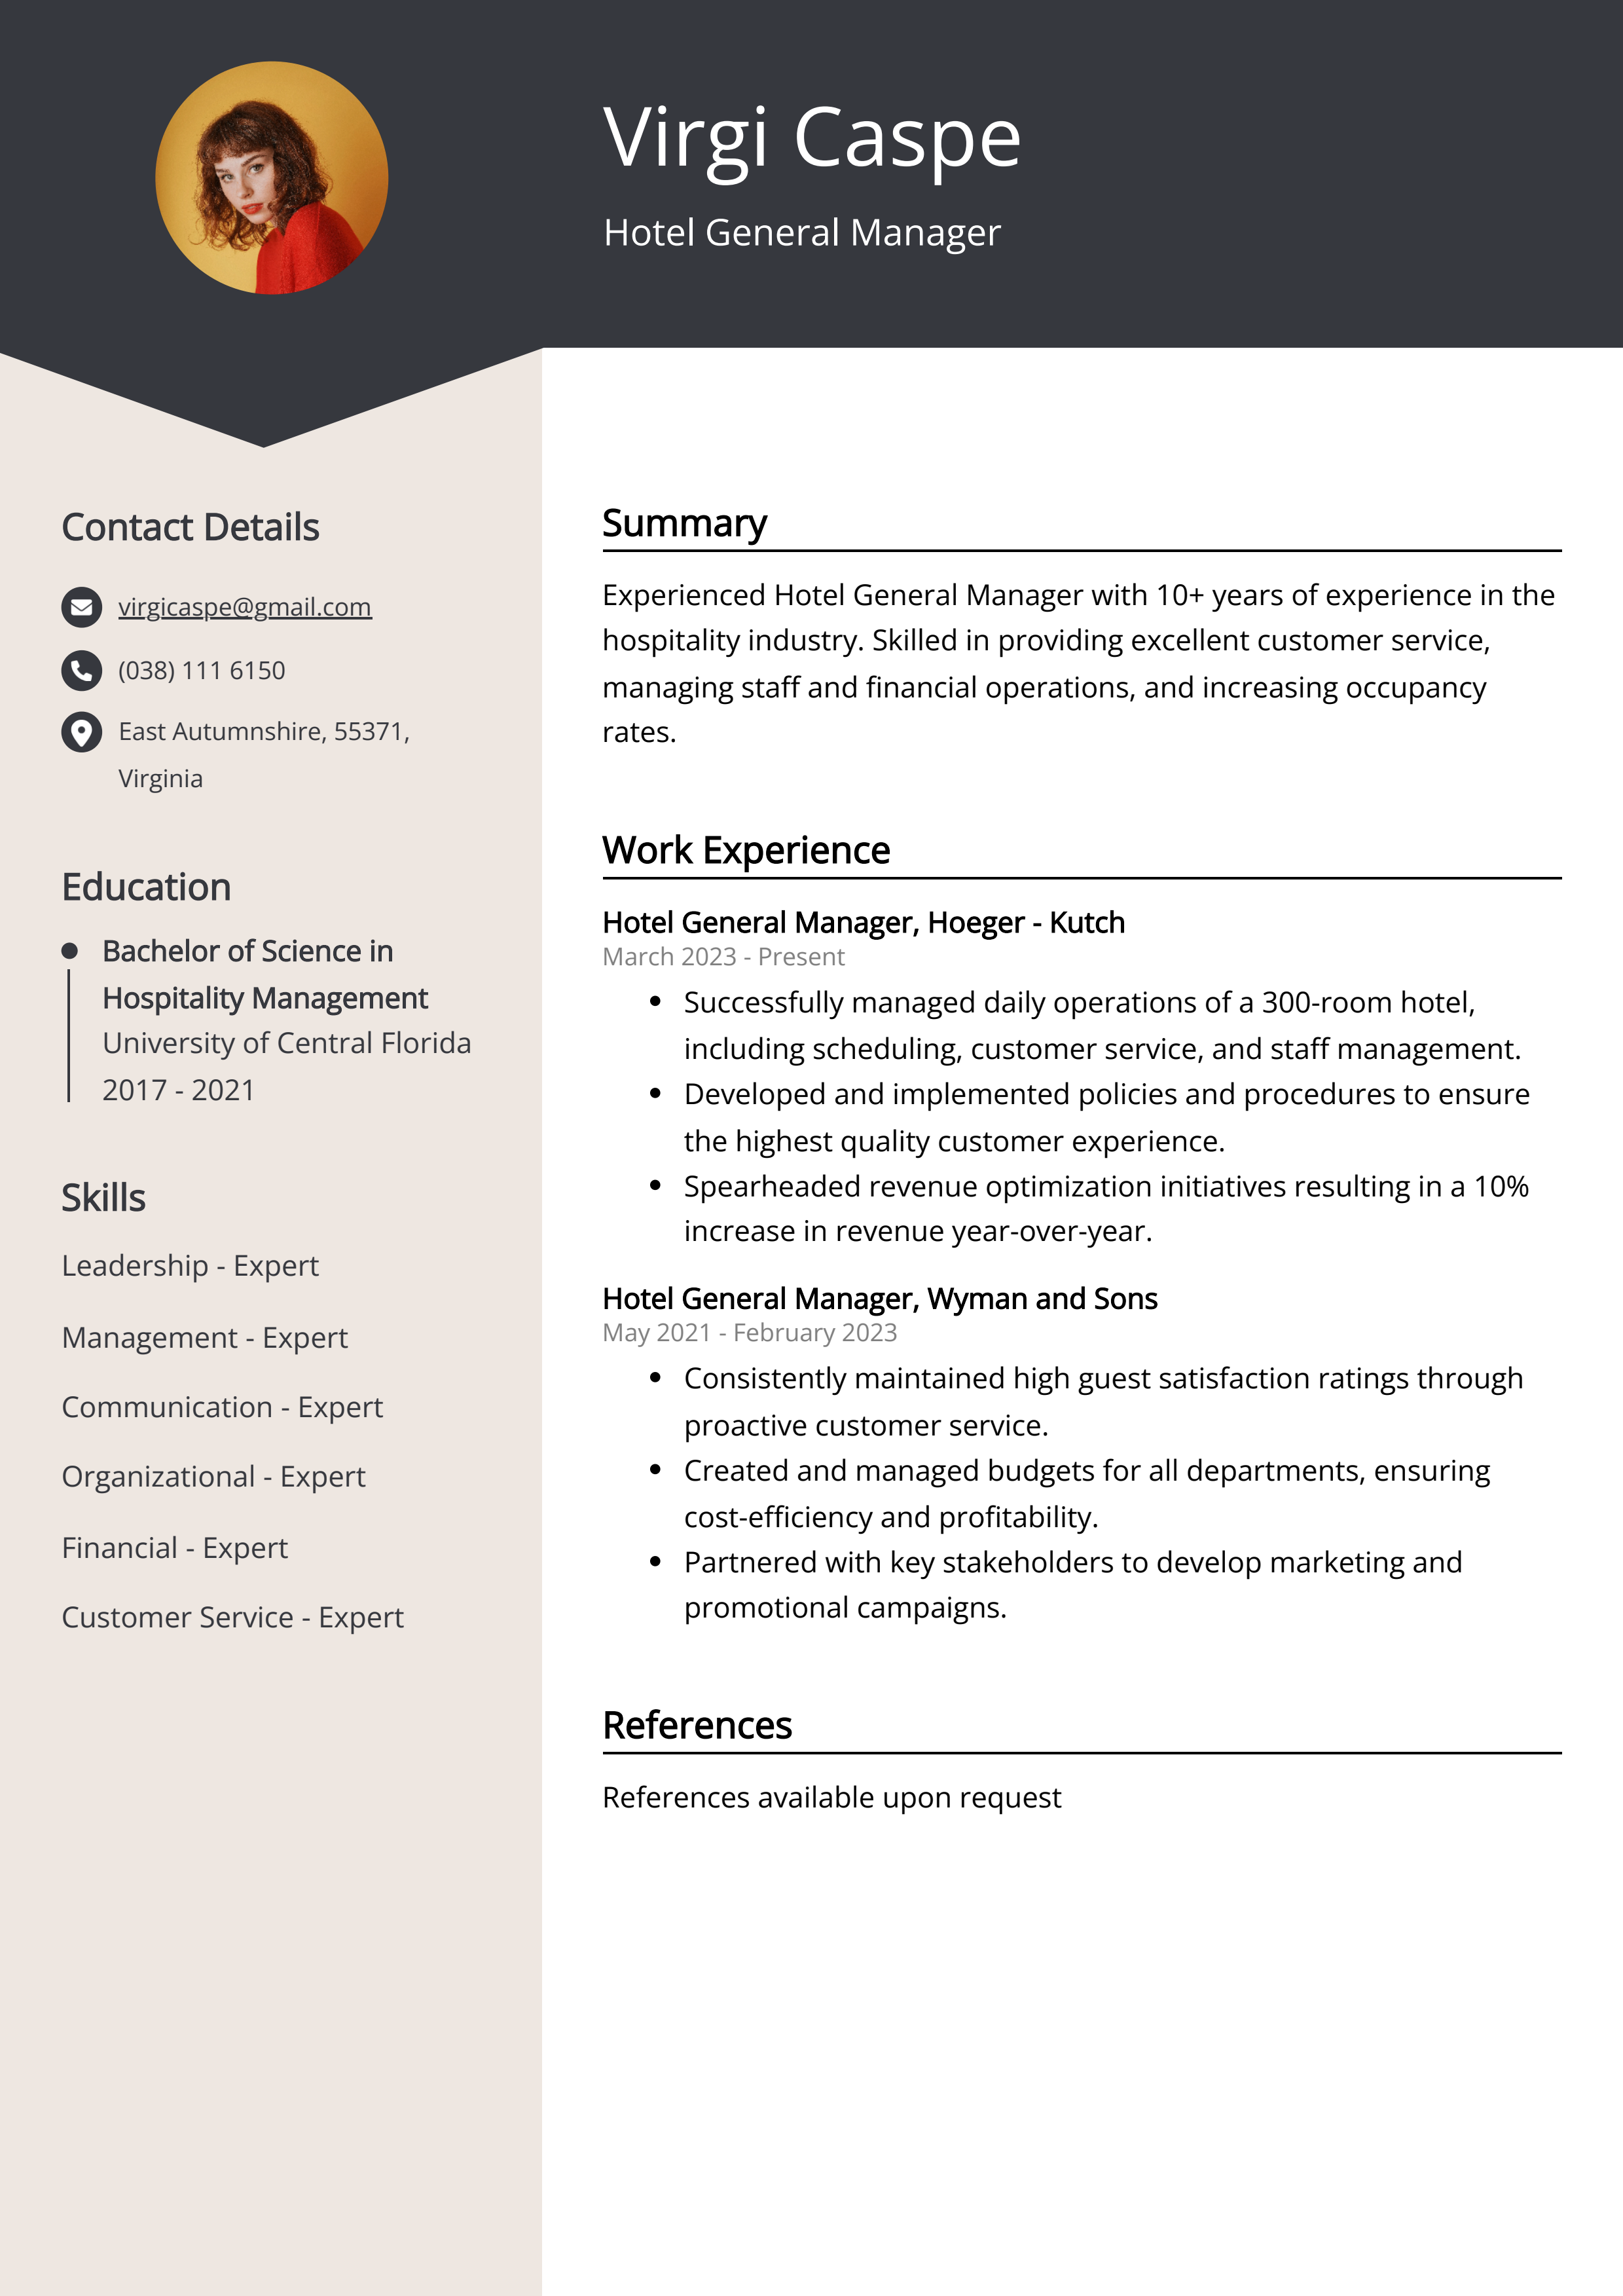 Hotel General Manager CV Example